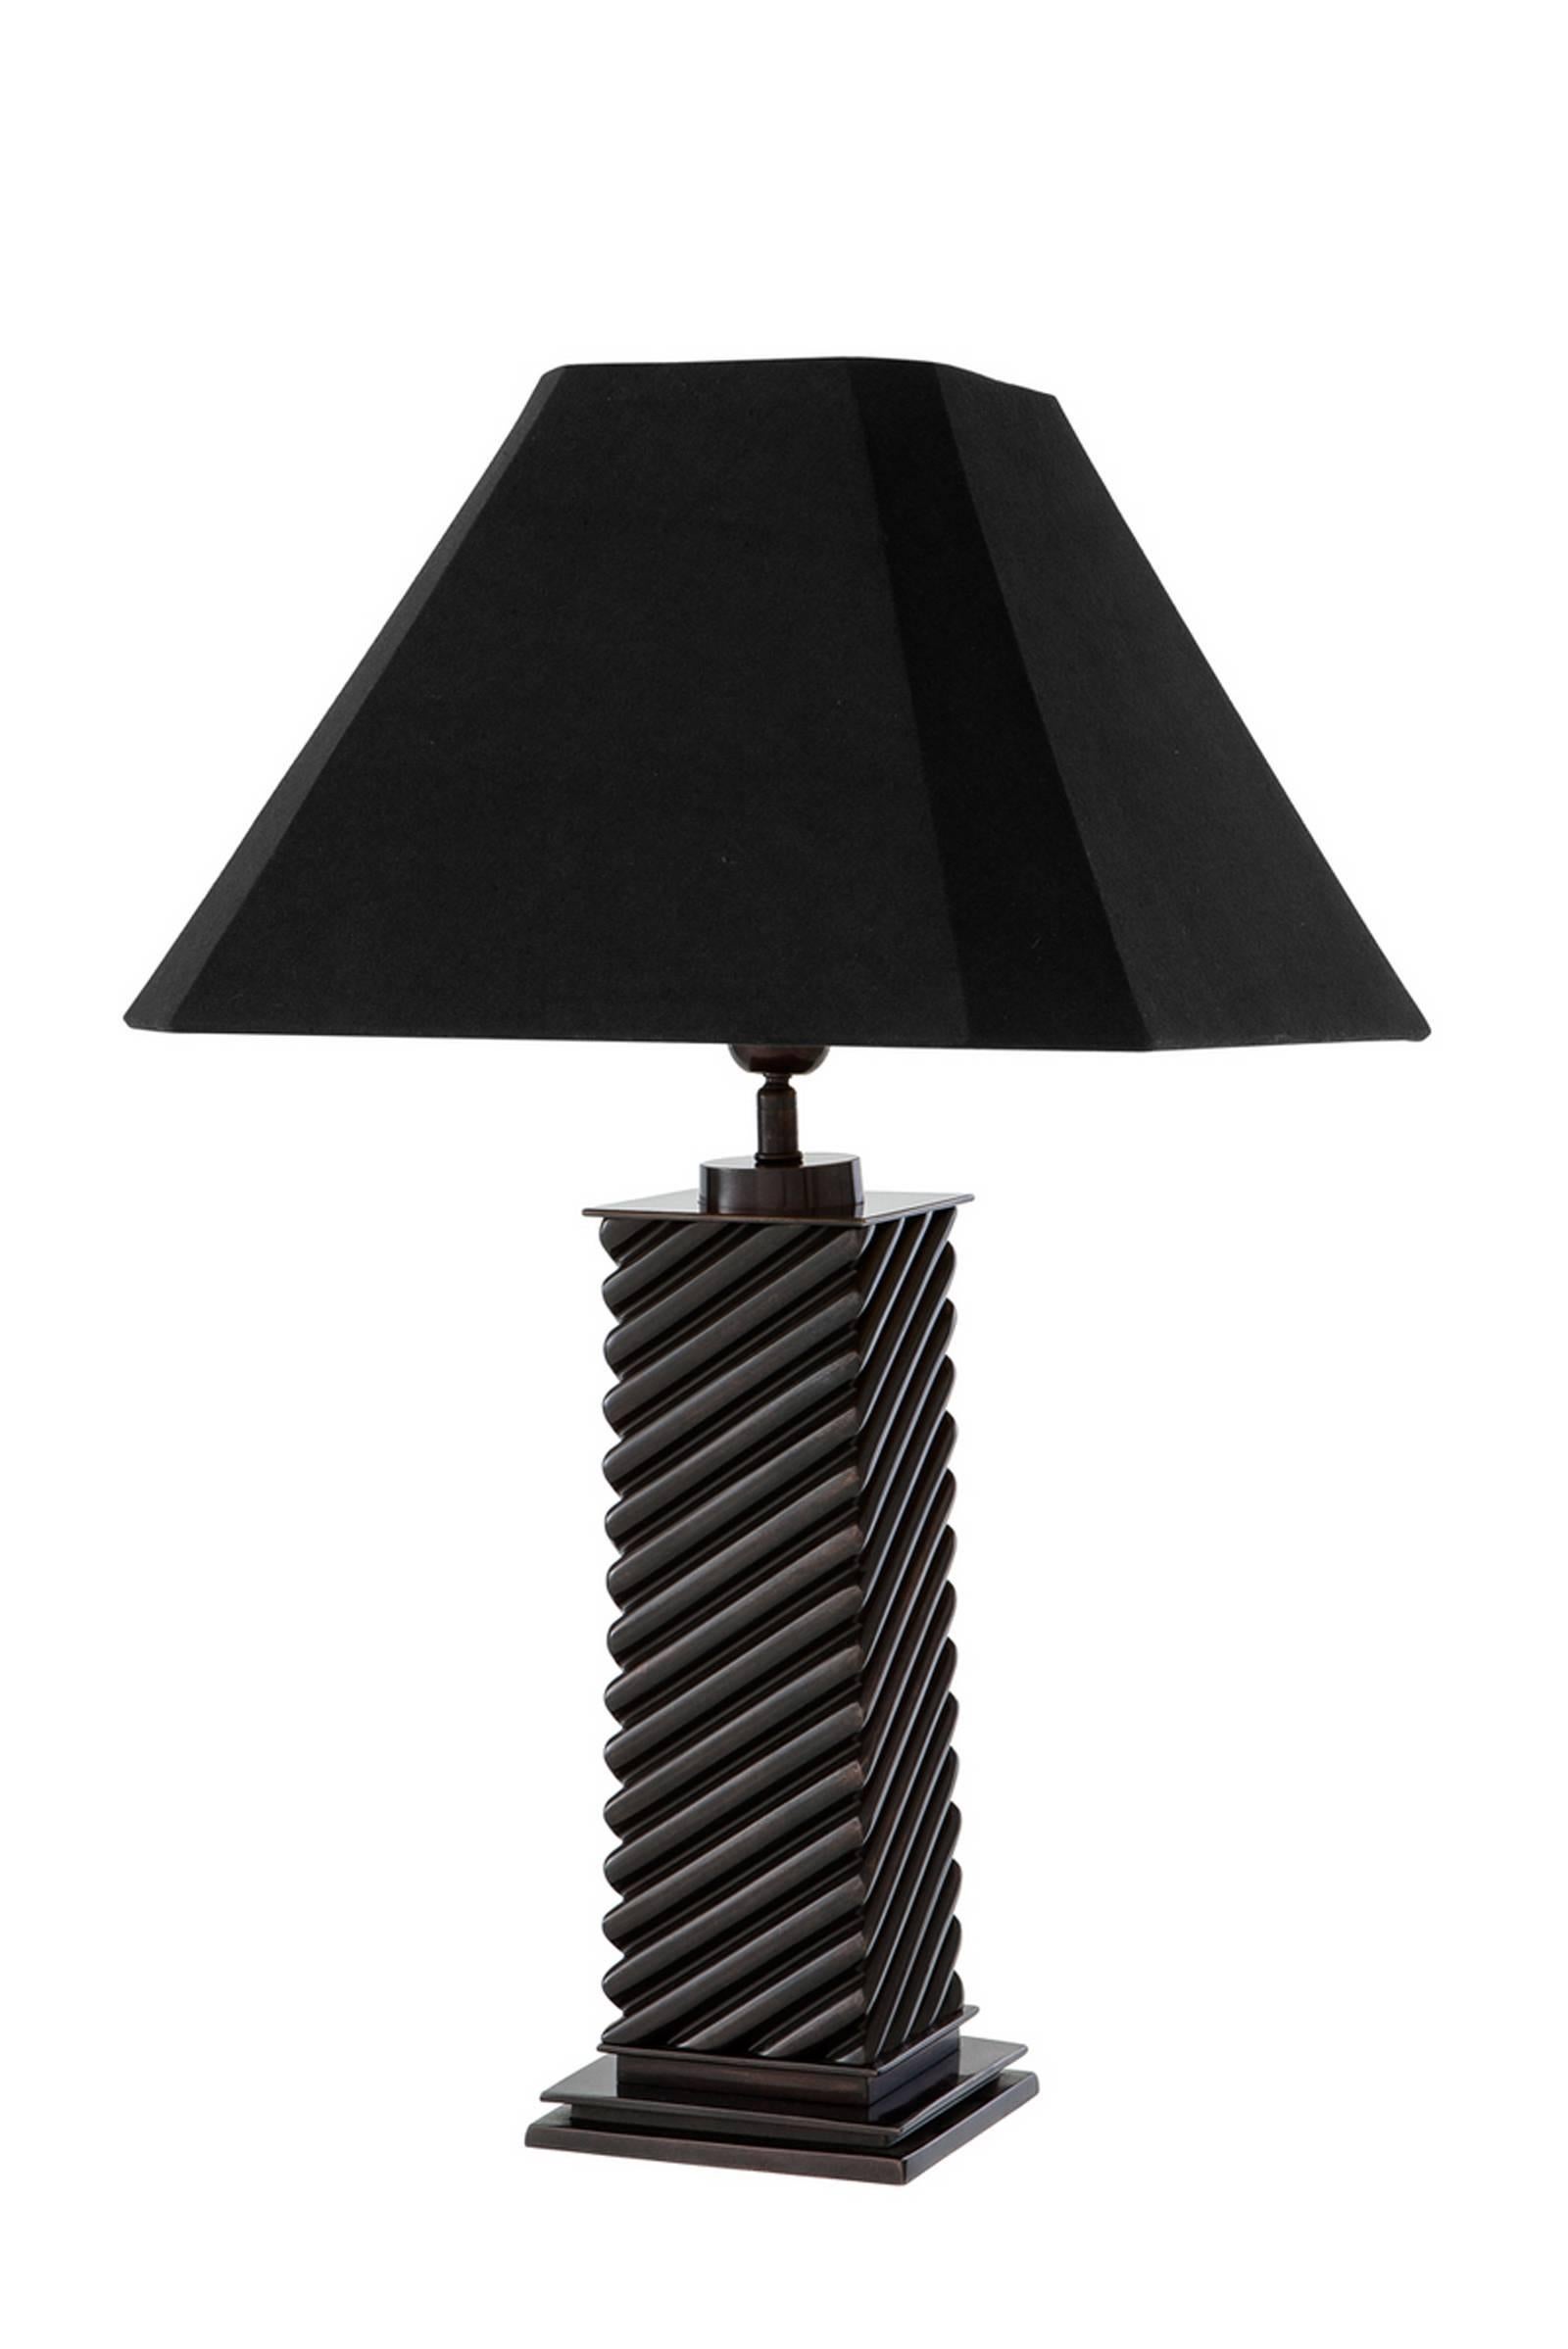 brass table lamps with black shades